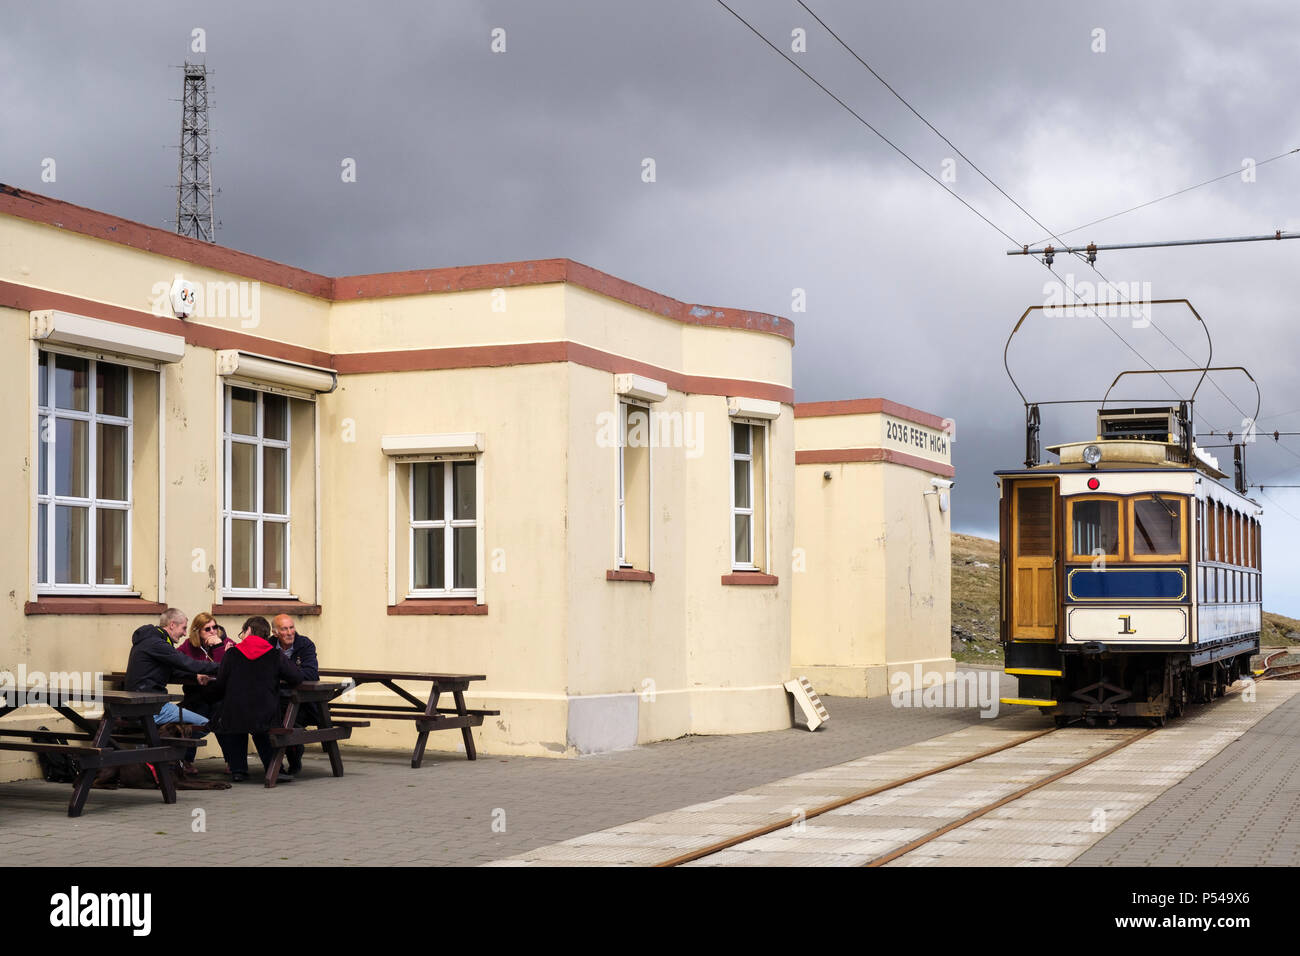 Snaefell Mountain Tramway electric railcar train carriage number 1, built 1895, at the summit station cafe. Laxey, Isle of Man, British Isles Stock Photo